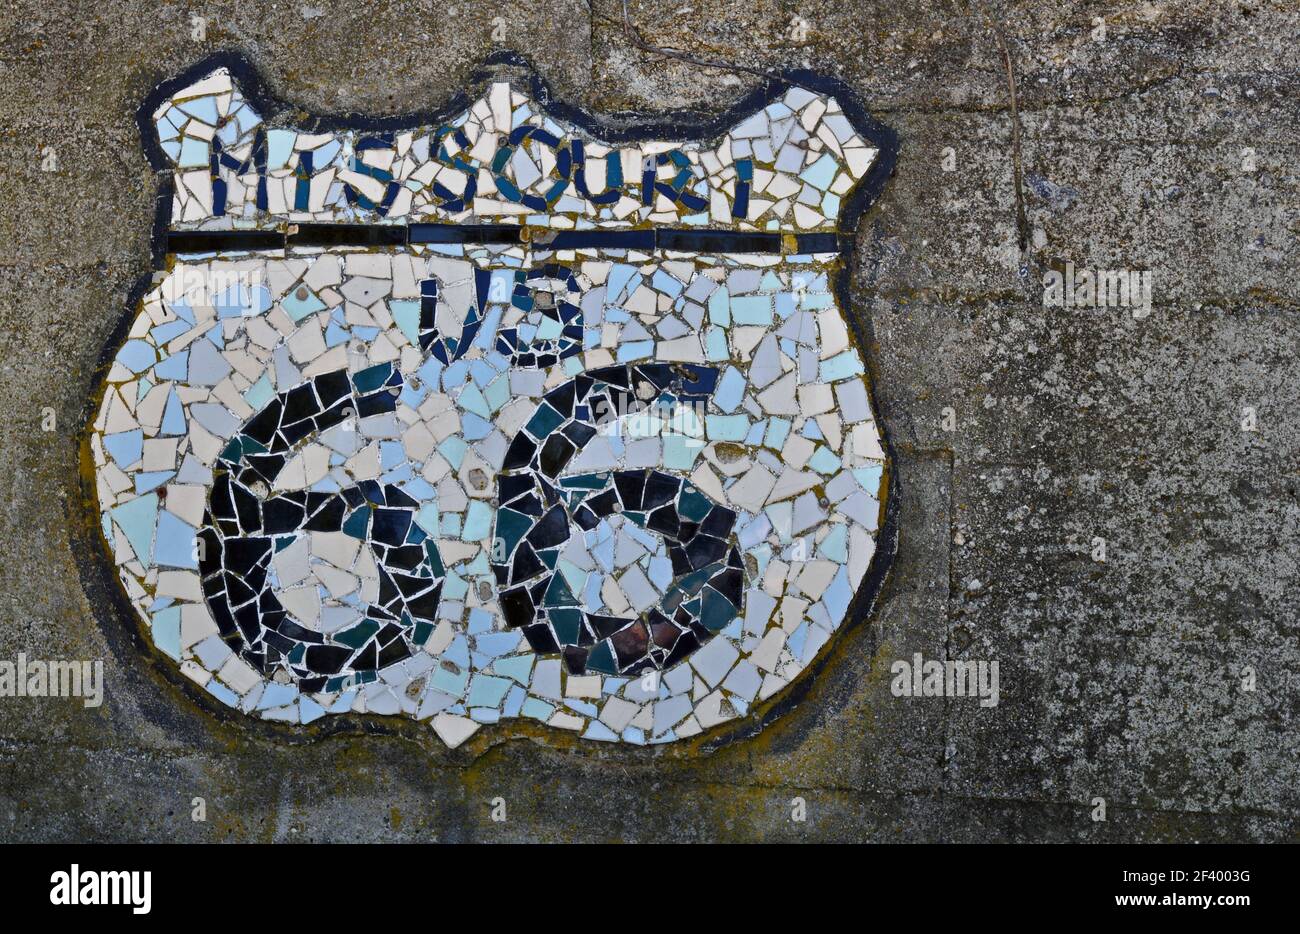 An artistic US 66 highway shield at the College Street Great Mosaic Wall in Springfield, MO, across from the Birthplace of Route 66 Roadside Park. Stock Photo